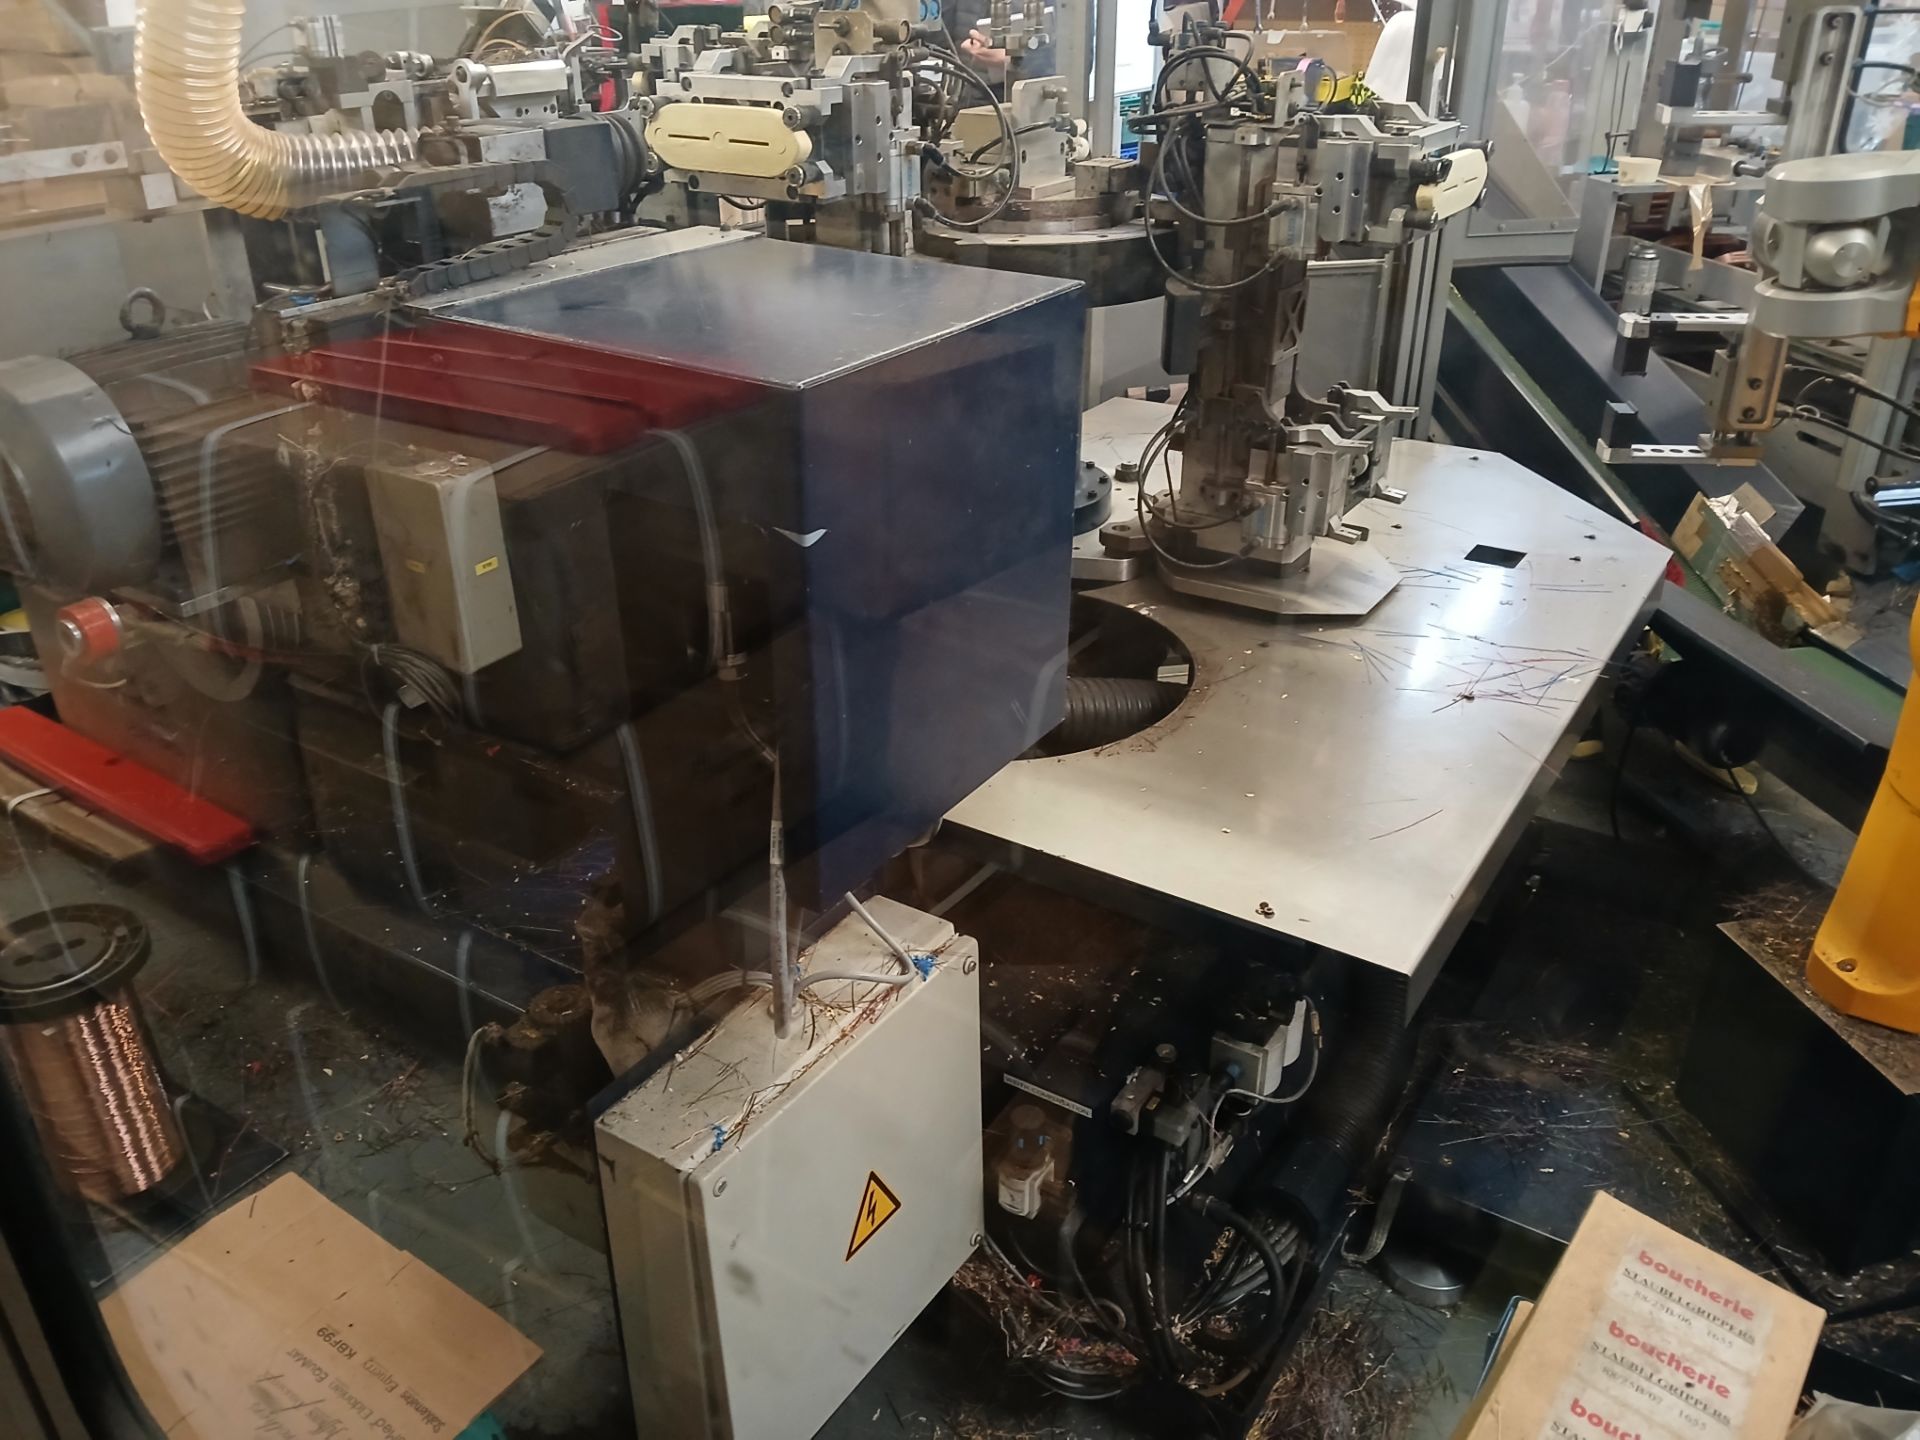 Boucherie TCU-CNC 5 axis robotic brush making machine, Serial number 1655 (2005) with Staubli TX90 - Image 13 of 23